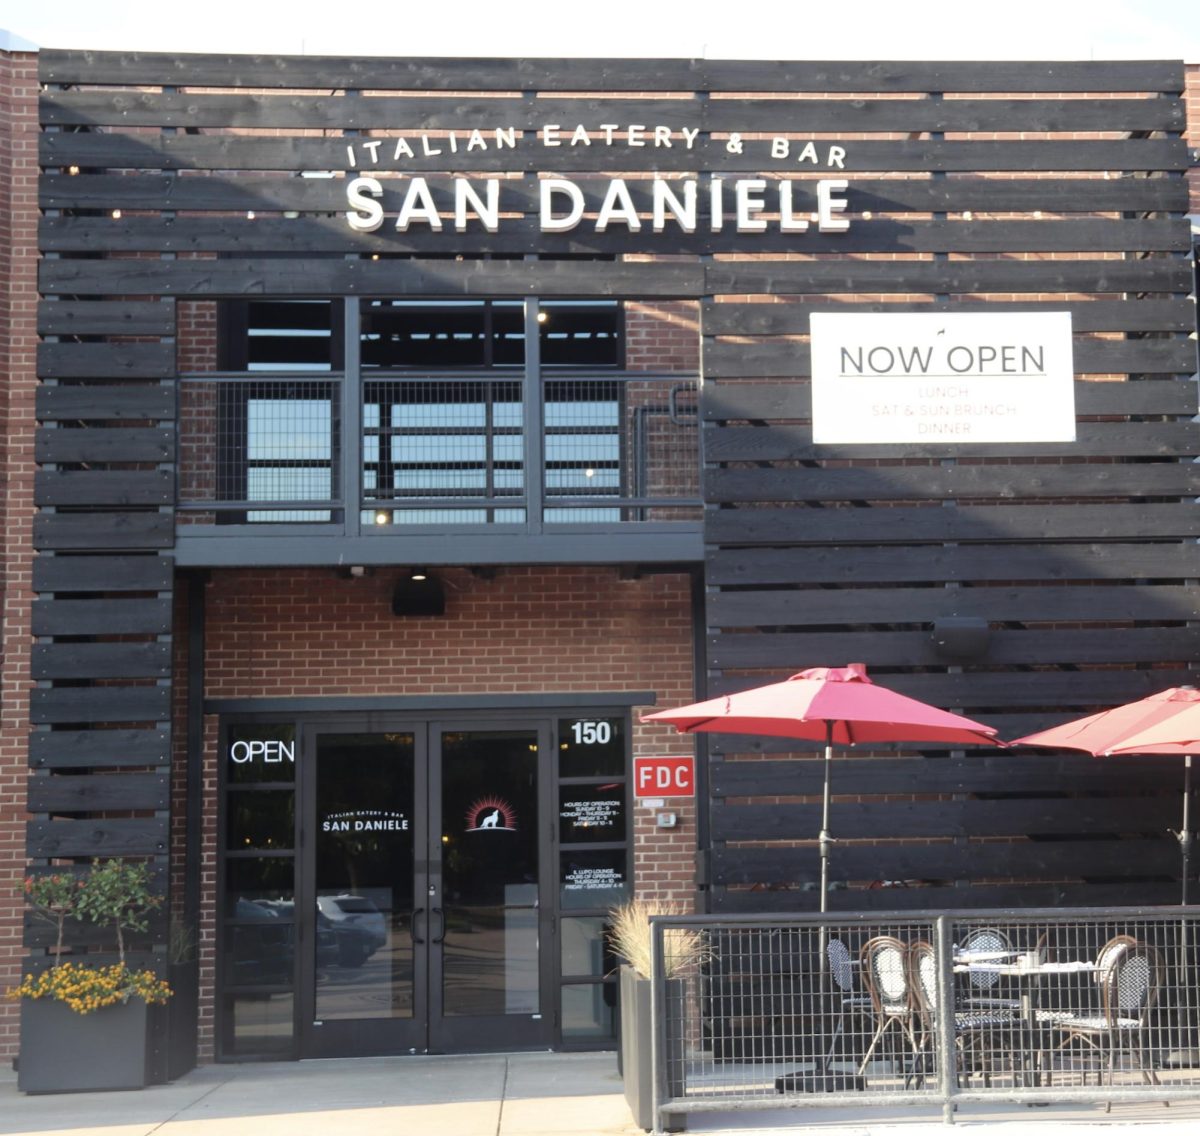 New restaurant San Daniele provides both indoor and outdoor seating to its customers. San Daniele opened in Coppell on Aug. 28, giving a taste of Italy to Coppell residents. (Ishana Sharma)